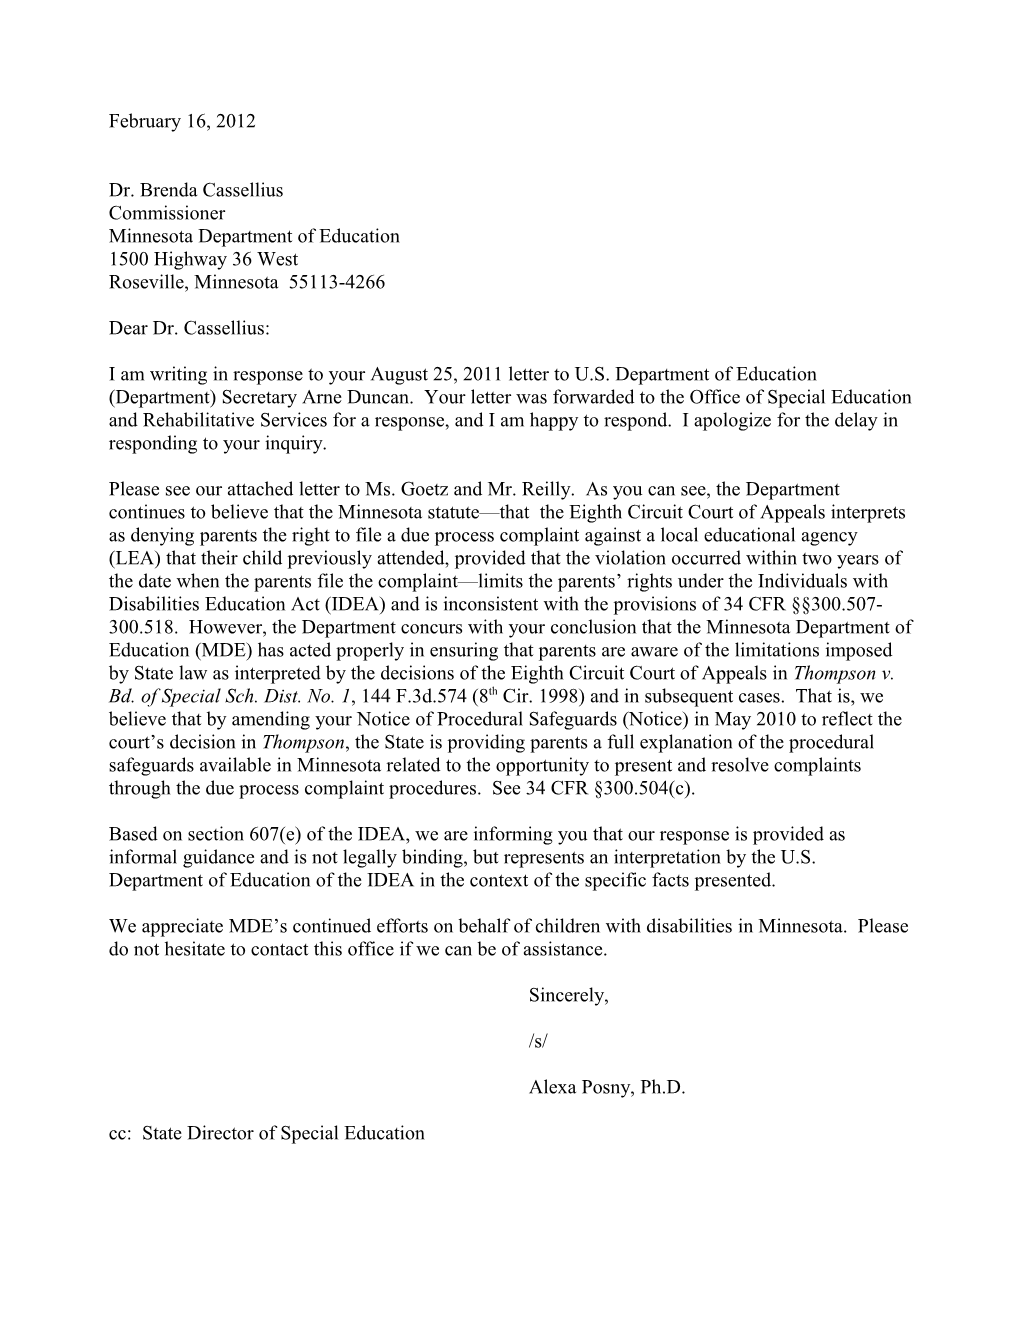 Cassellius Letter Dated 02-16-2012 Re Due Process Hearings (Word)